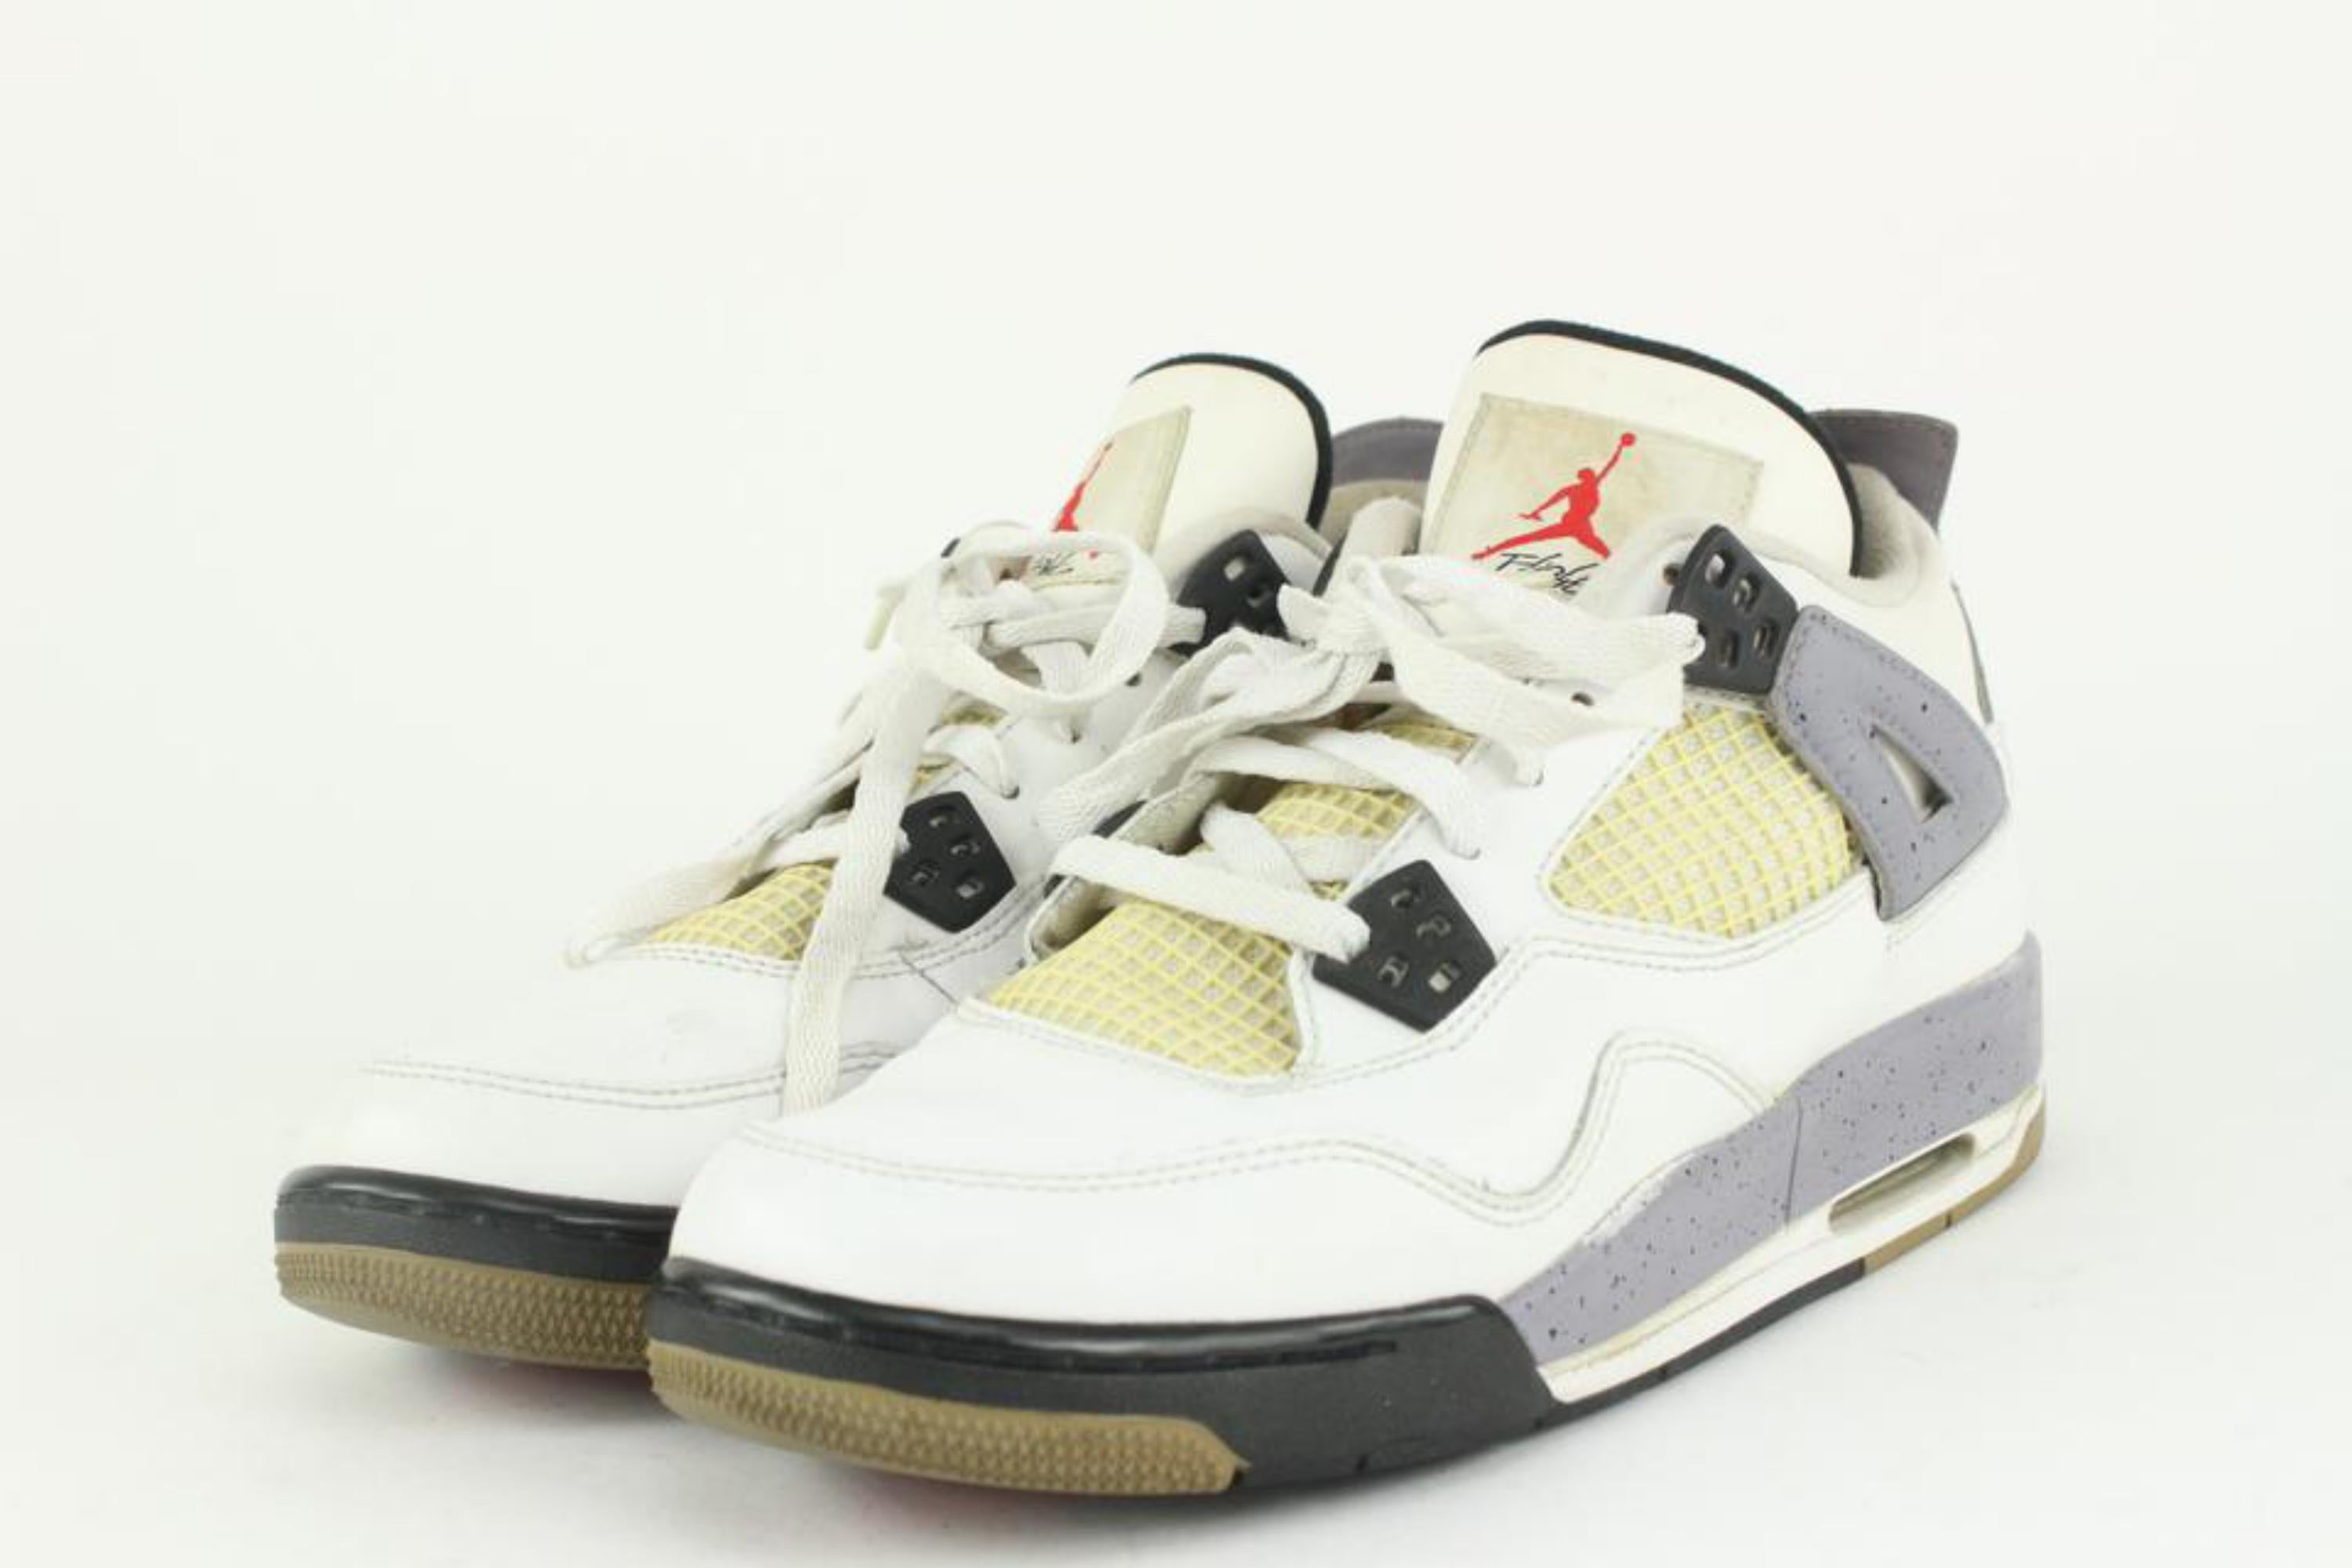 Nike 2011 Youth 7 US Cement White Air Jordan IV 4 408452-103
Date Code/Serial Number: 408452-103
Made In: China
Measurements: Length:  11